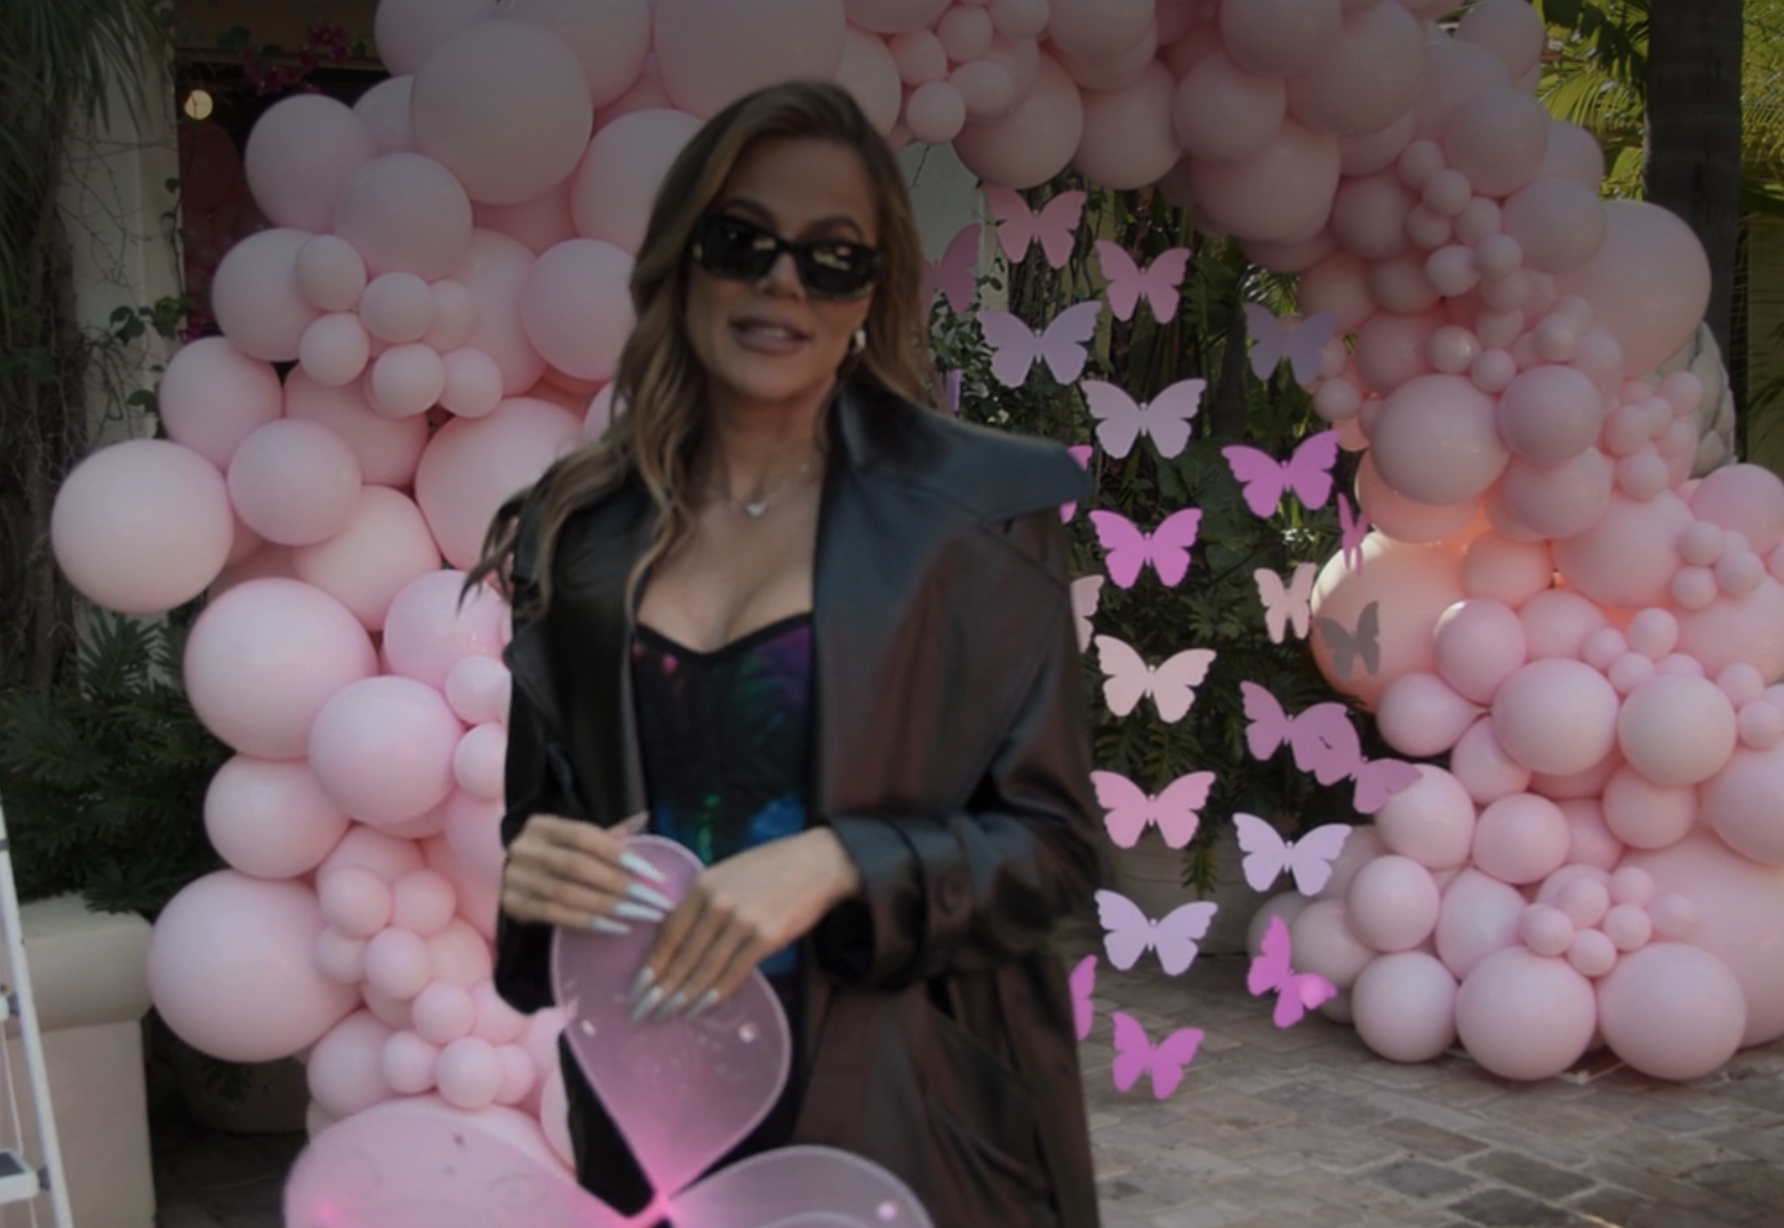 Khloé with a bunch of balloons and butterfly decorations behind her